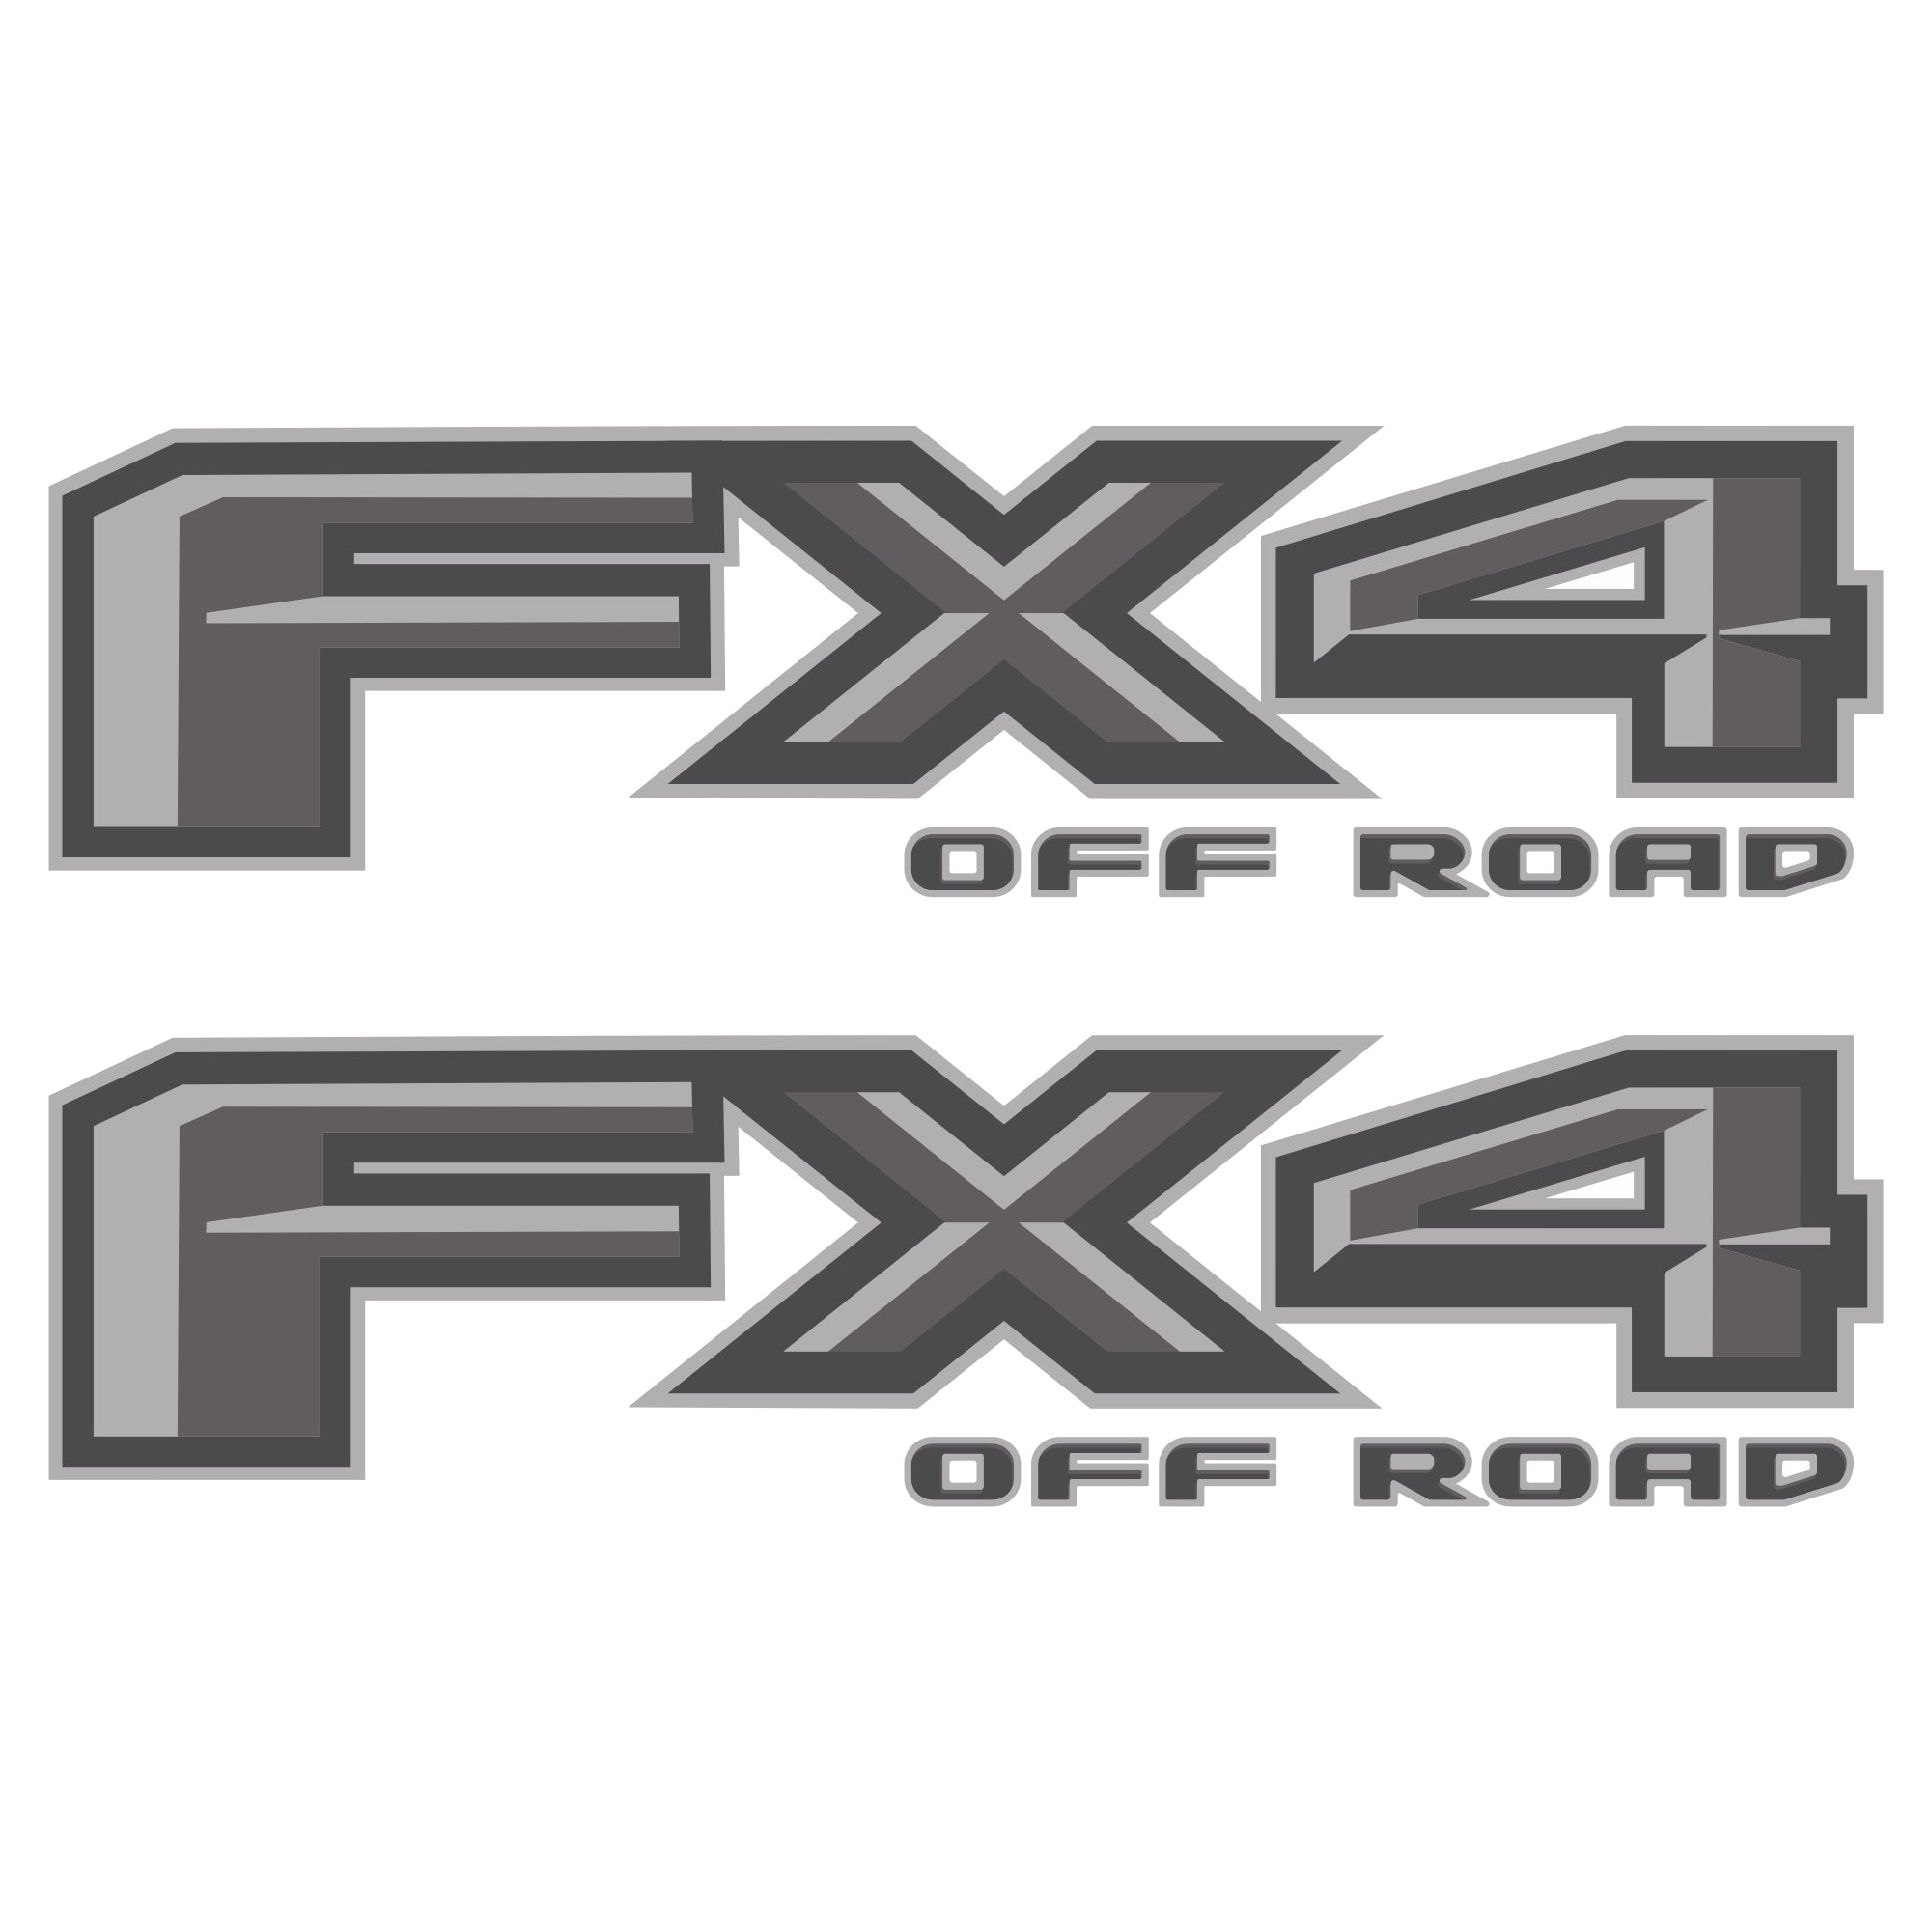 FX4 Off Road Decal Replacement Sticker F150 Bedside F Truck Super